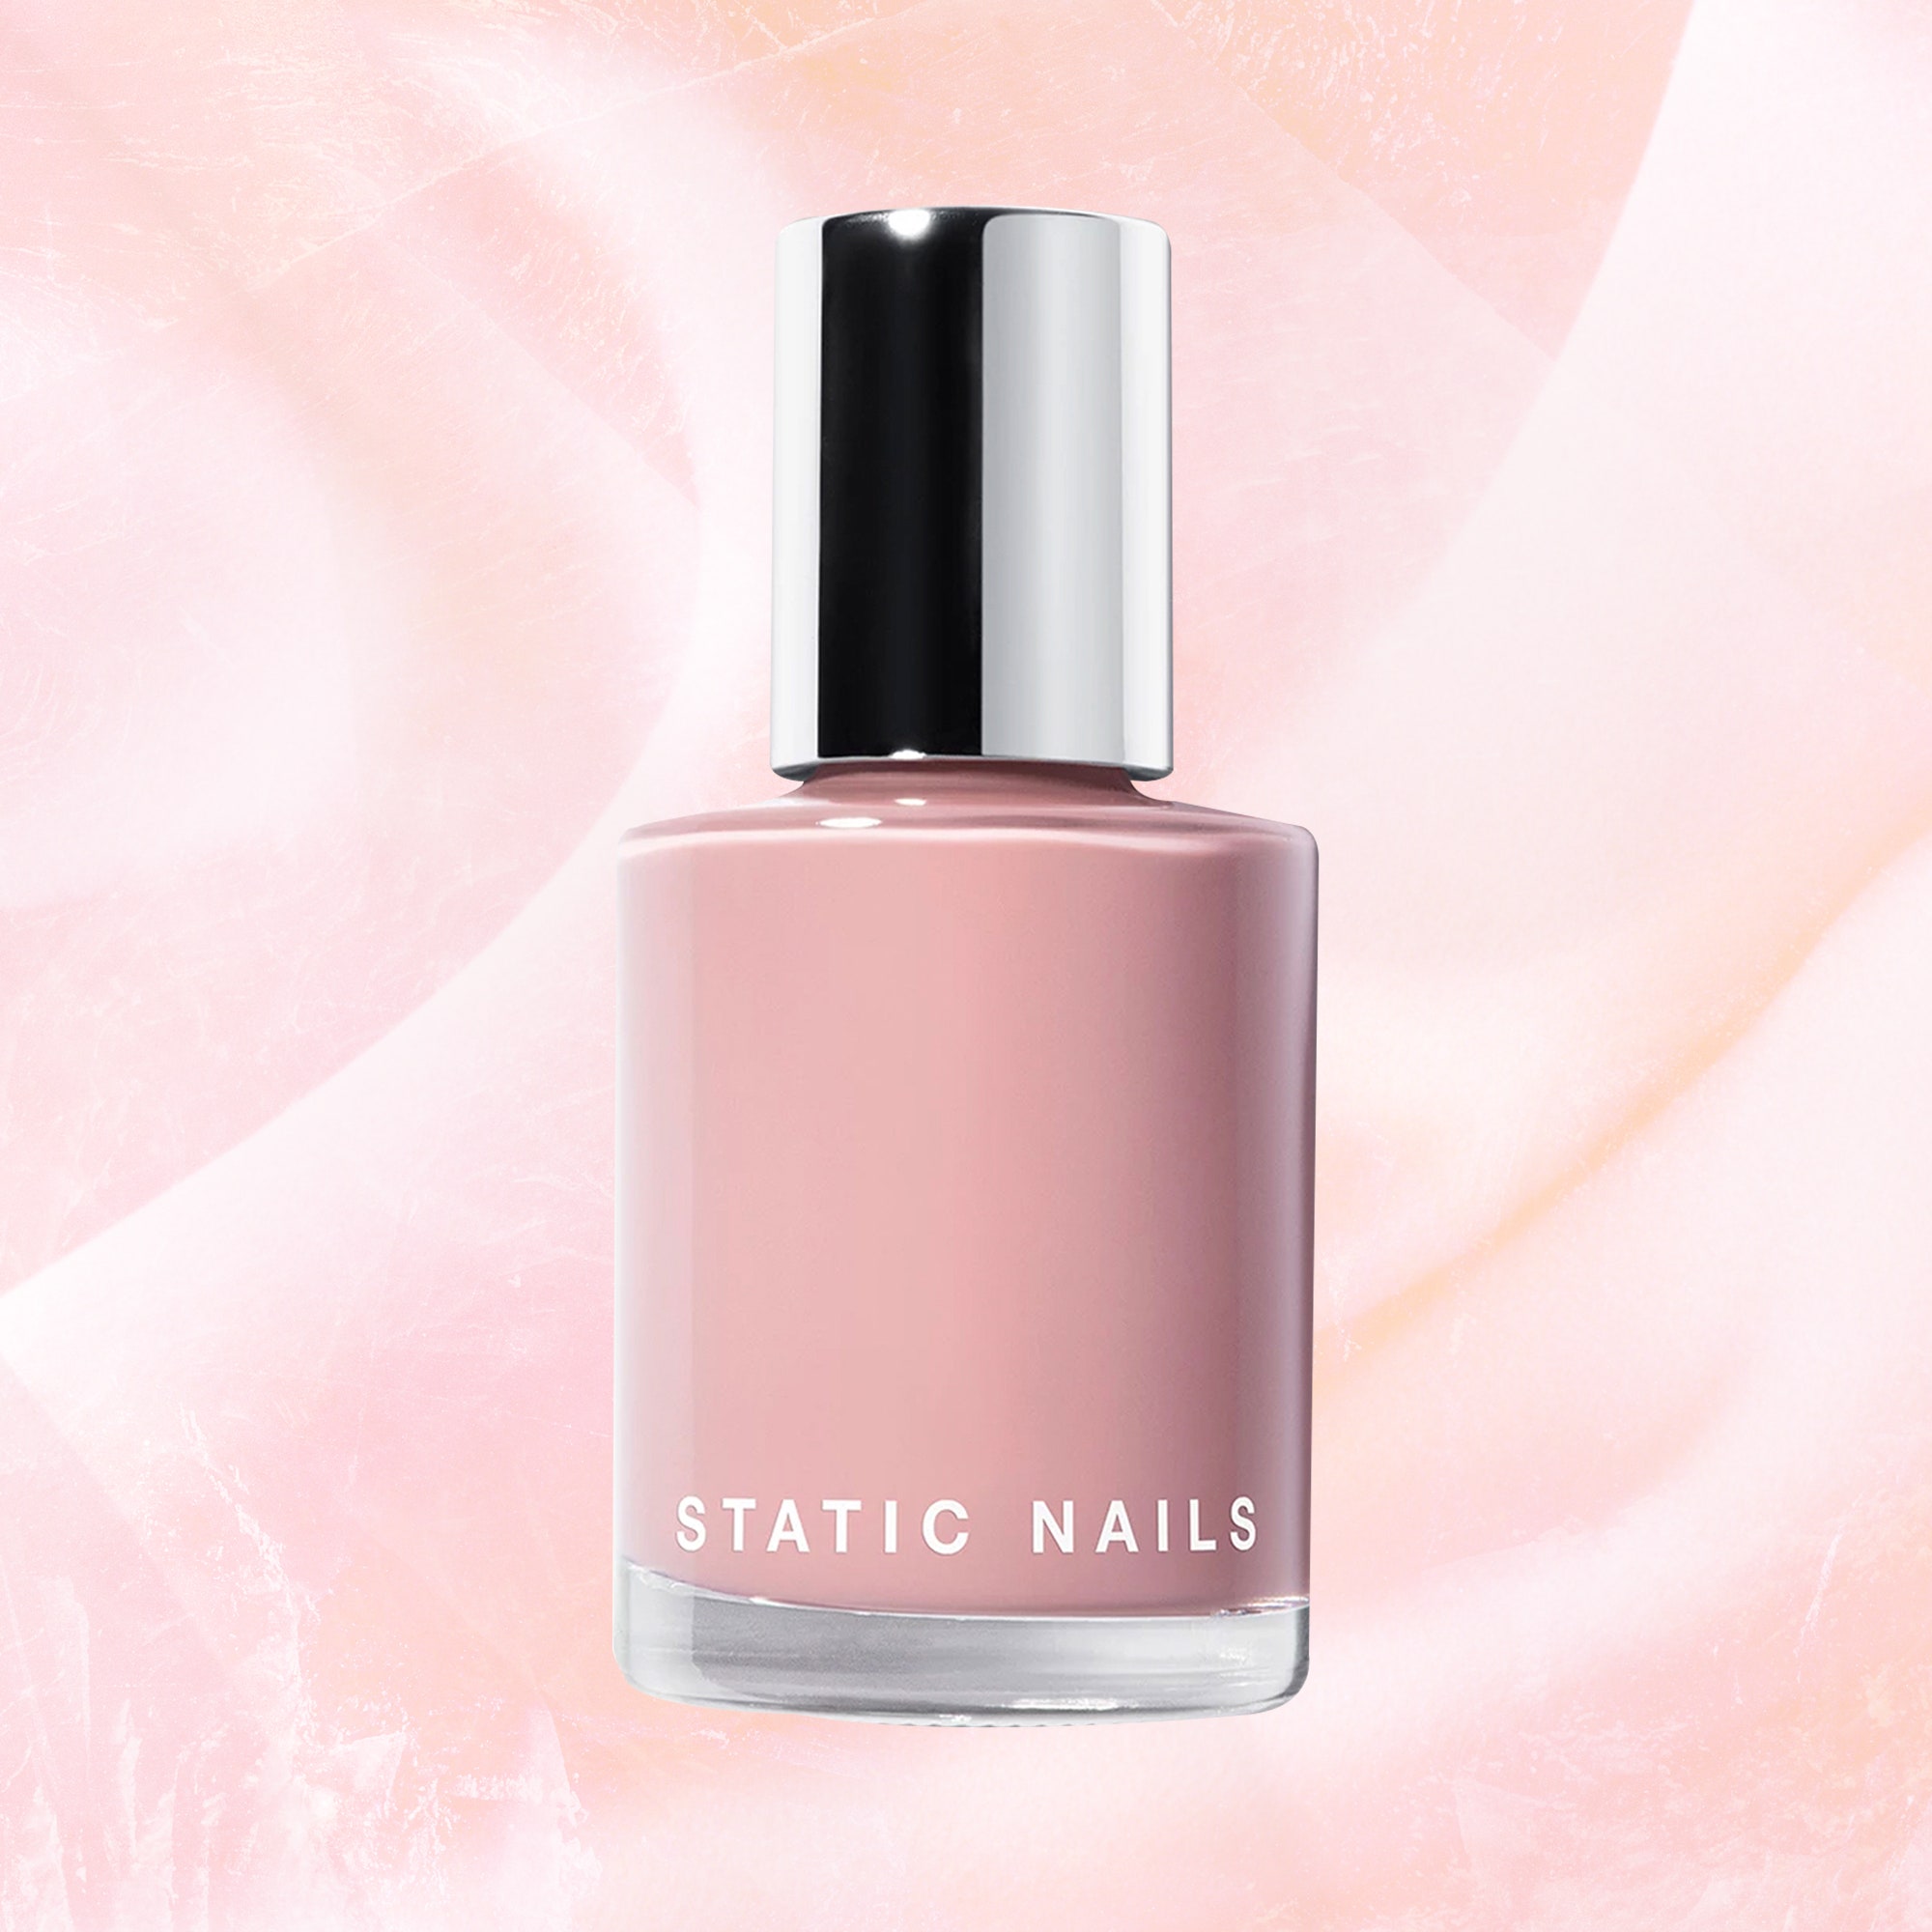 Static Nails Liquid Glass Lacquer in Irene Is My Perfect Nude